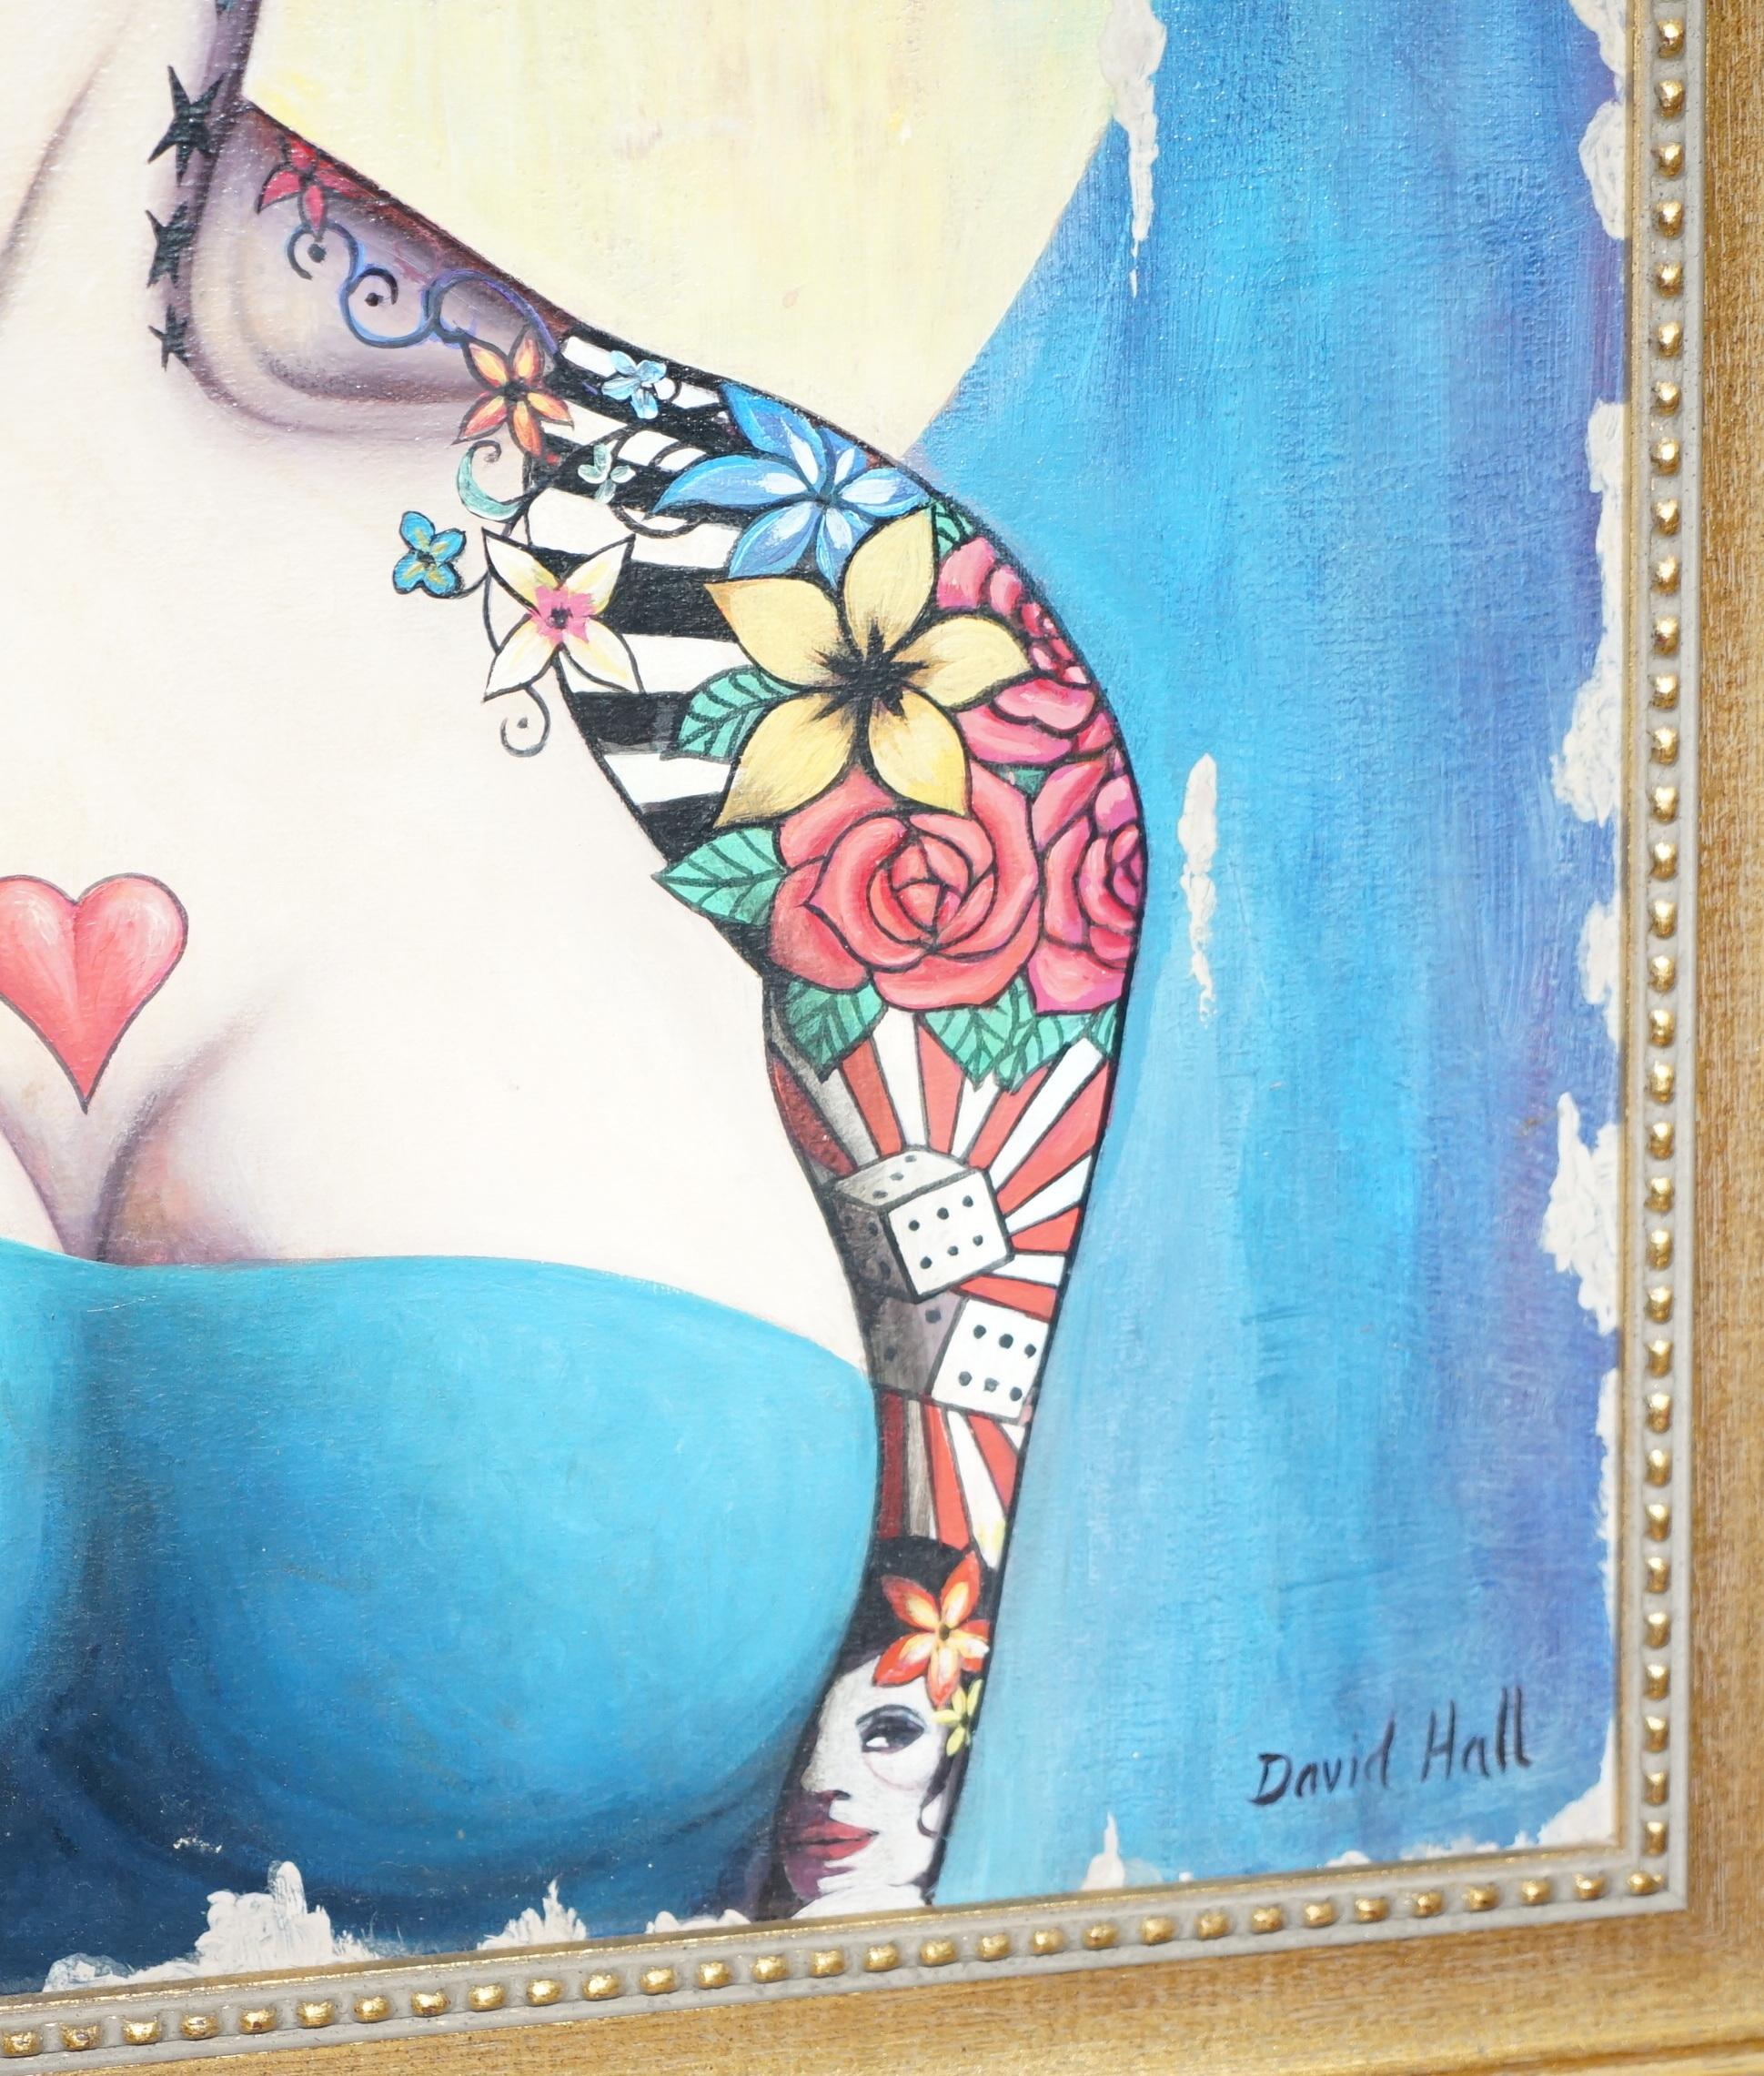 Sublime David Hall Oil on Boarding Painting of a Very Cool Heavily Tattooed Chic 4